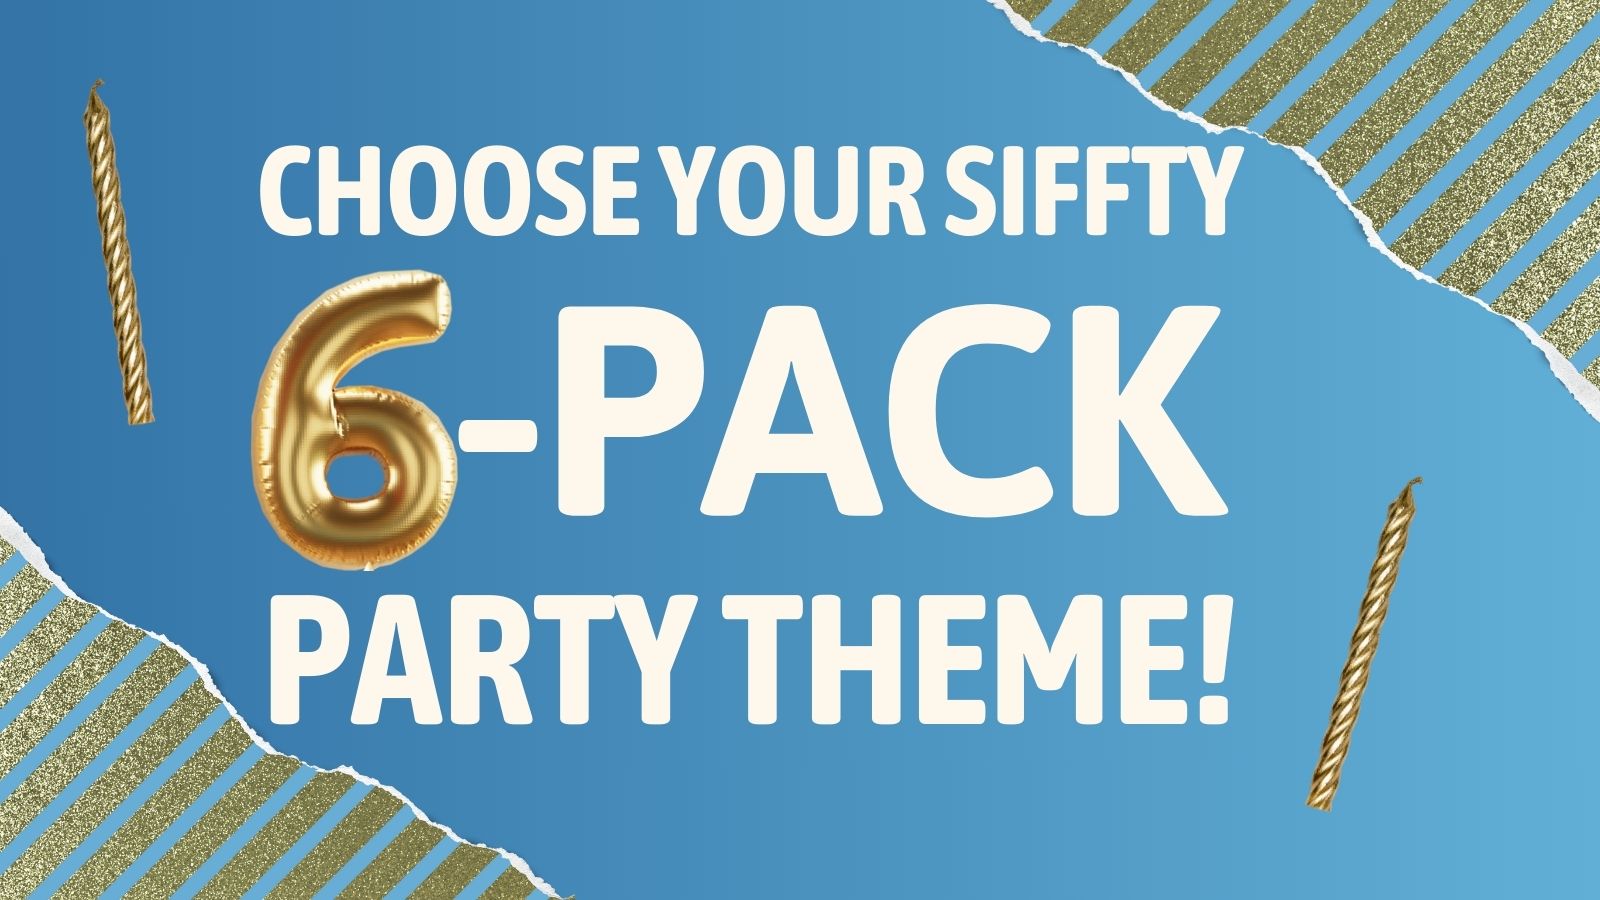 Choose Your SIFFTY 6-Pack Party Theme!